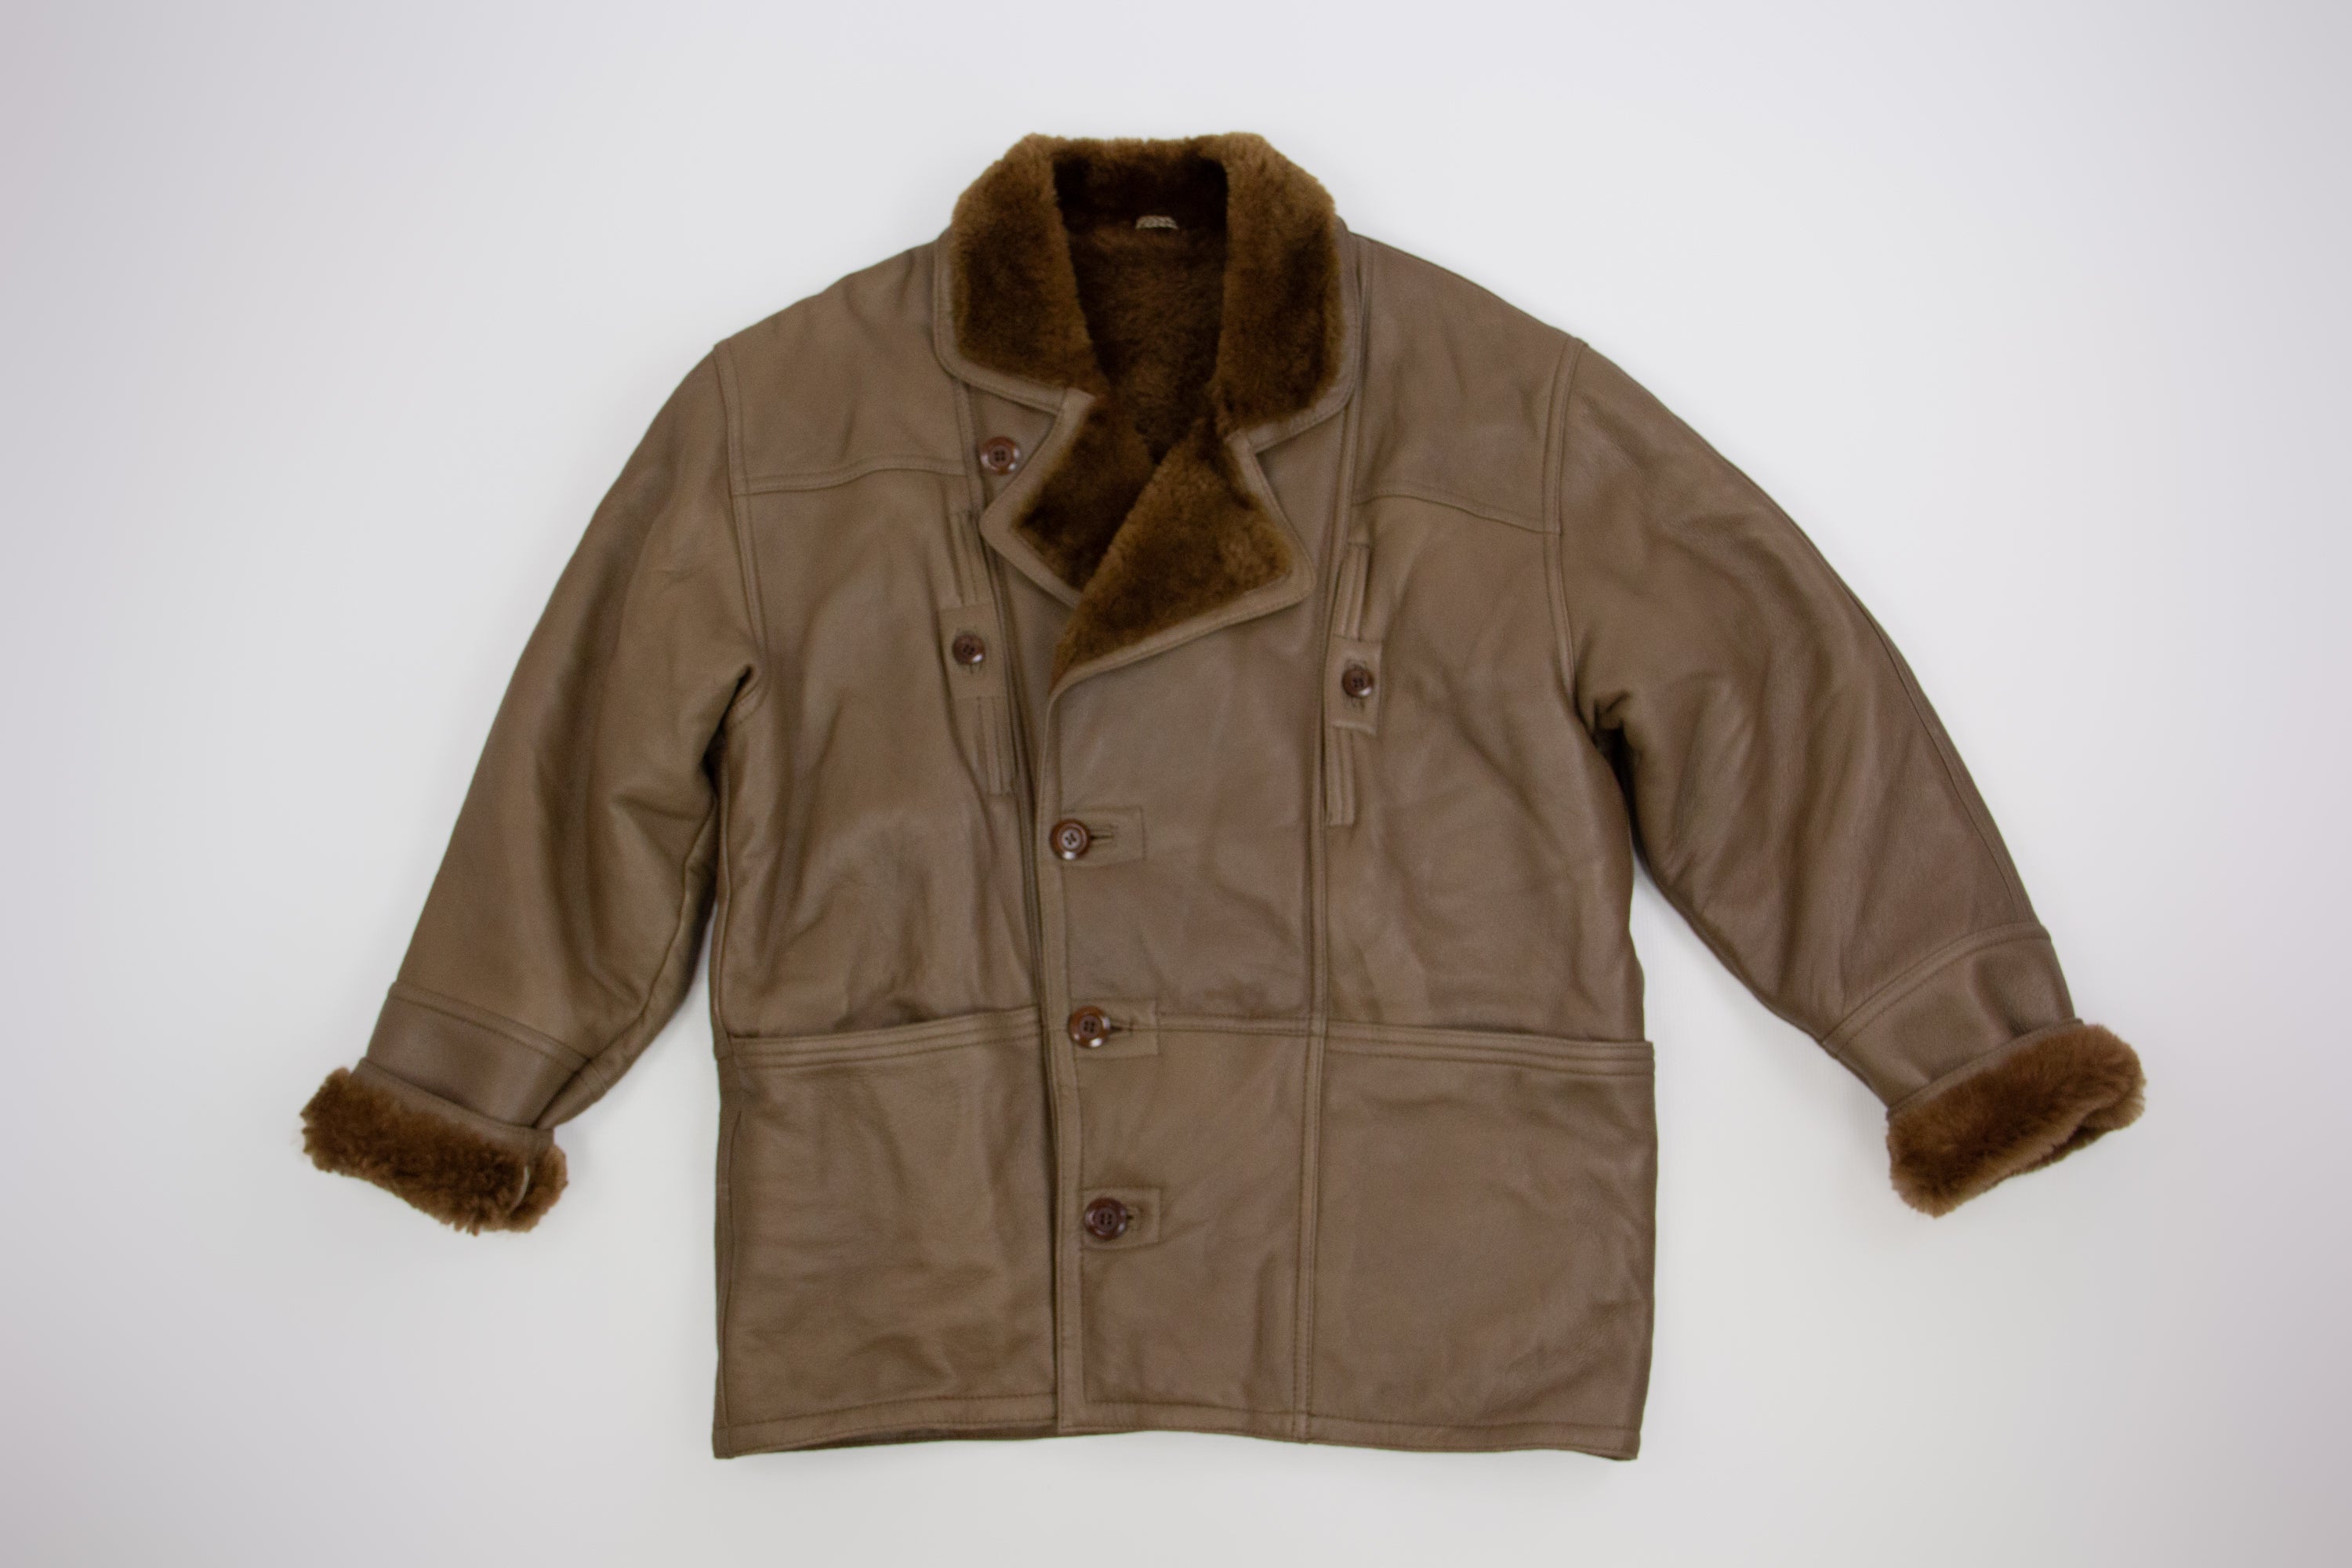 Pre-Fall 2013 Lambskin Shearling Jacket, Authentic & Vintage